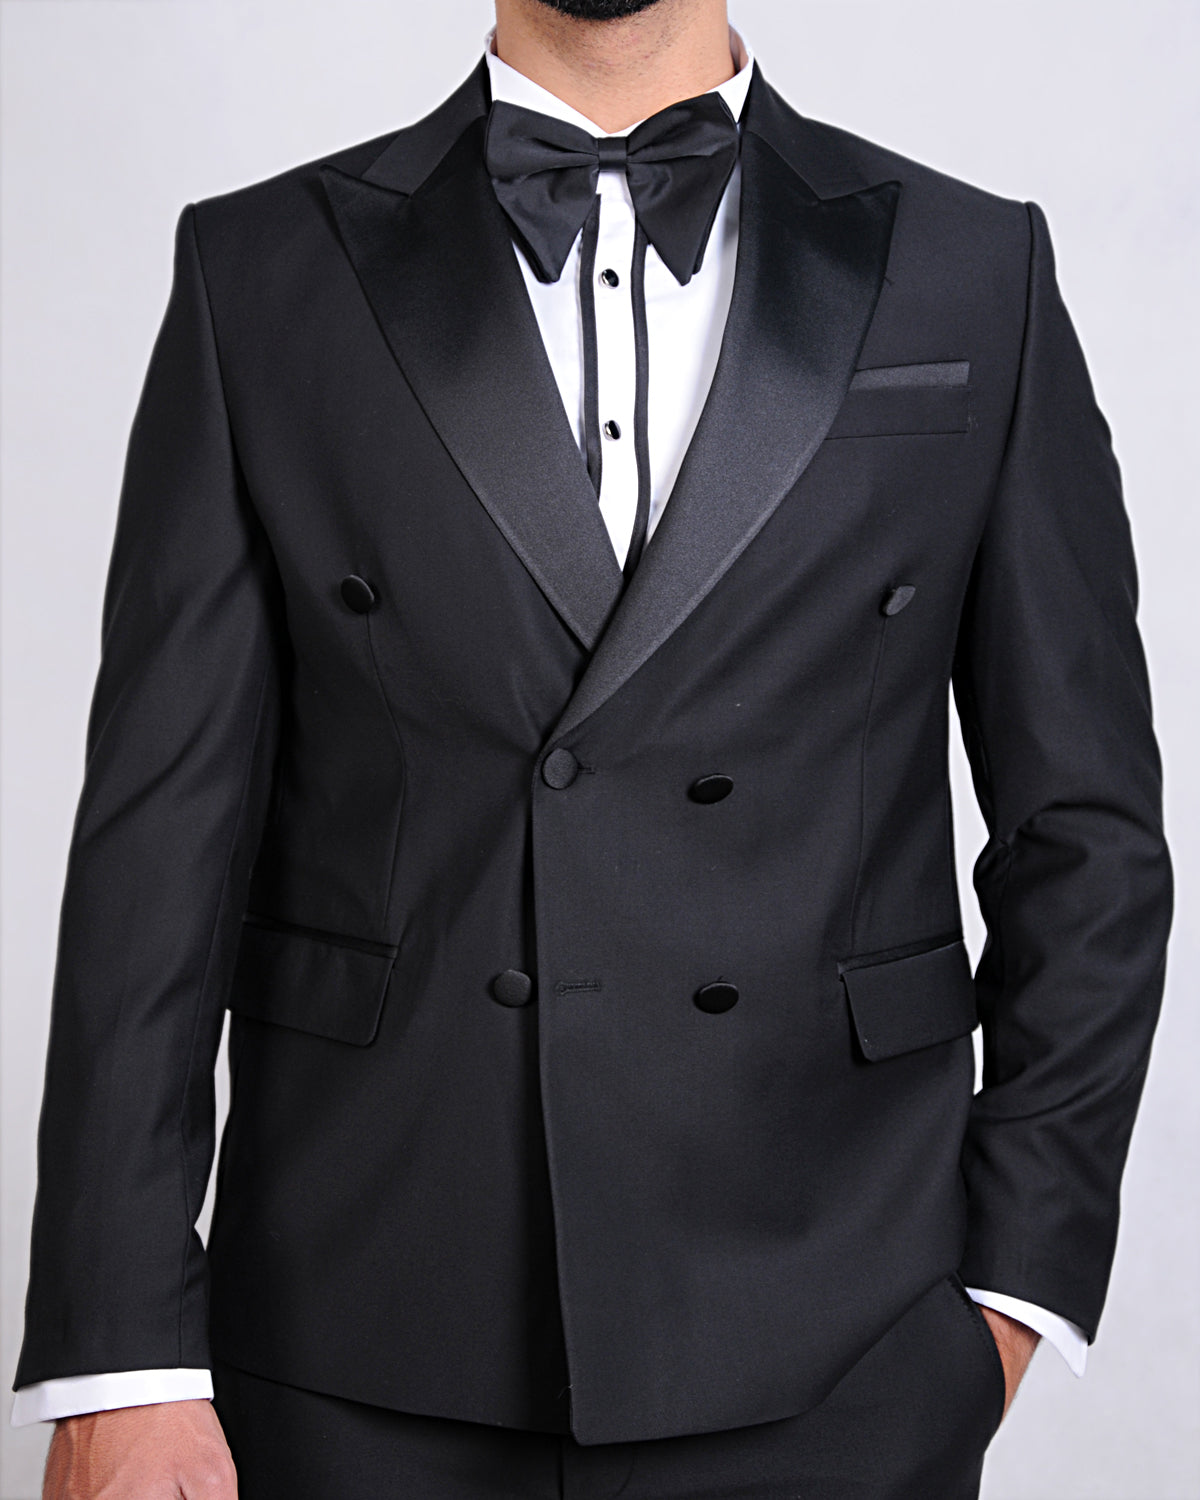 2H black peaked Lapel Double breasted Suit 2 Pieces